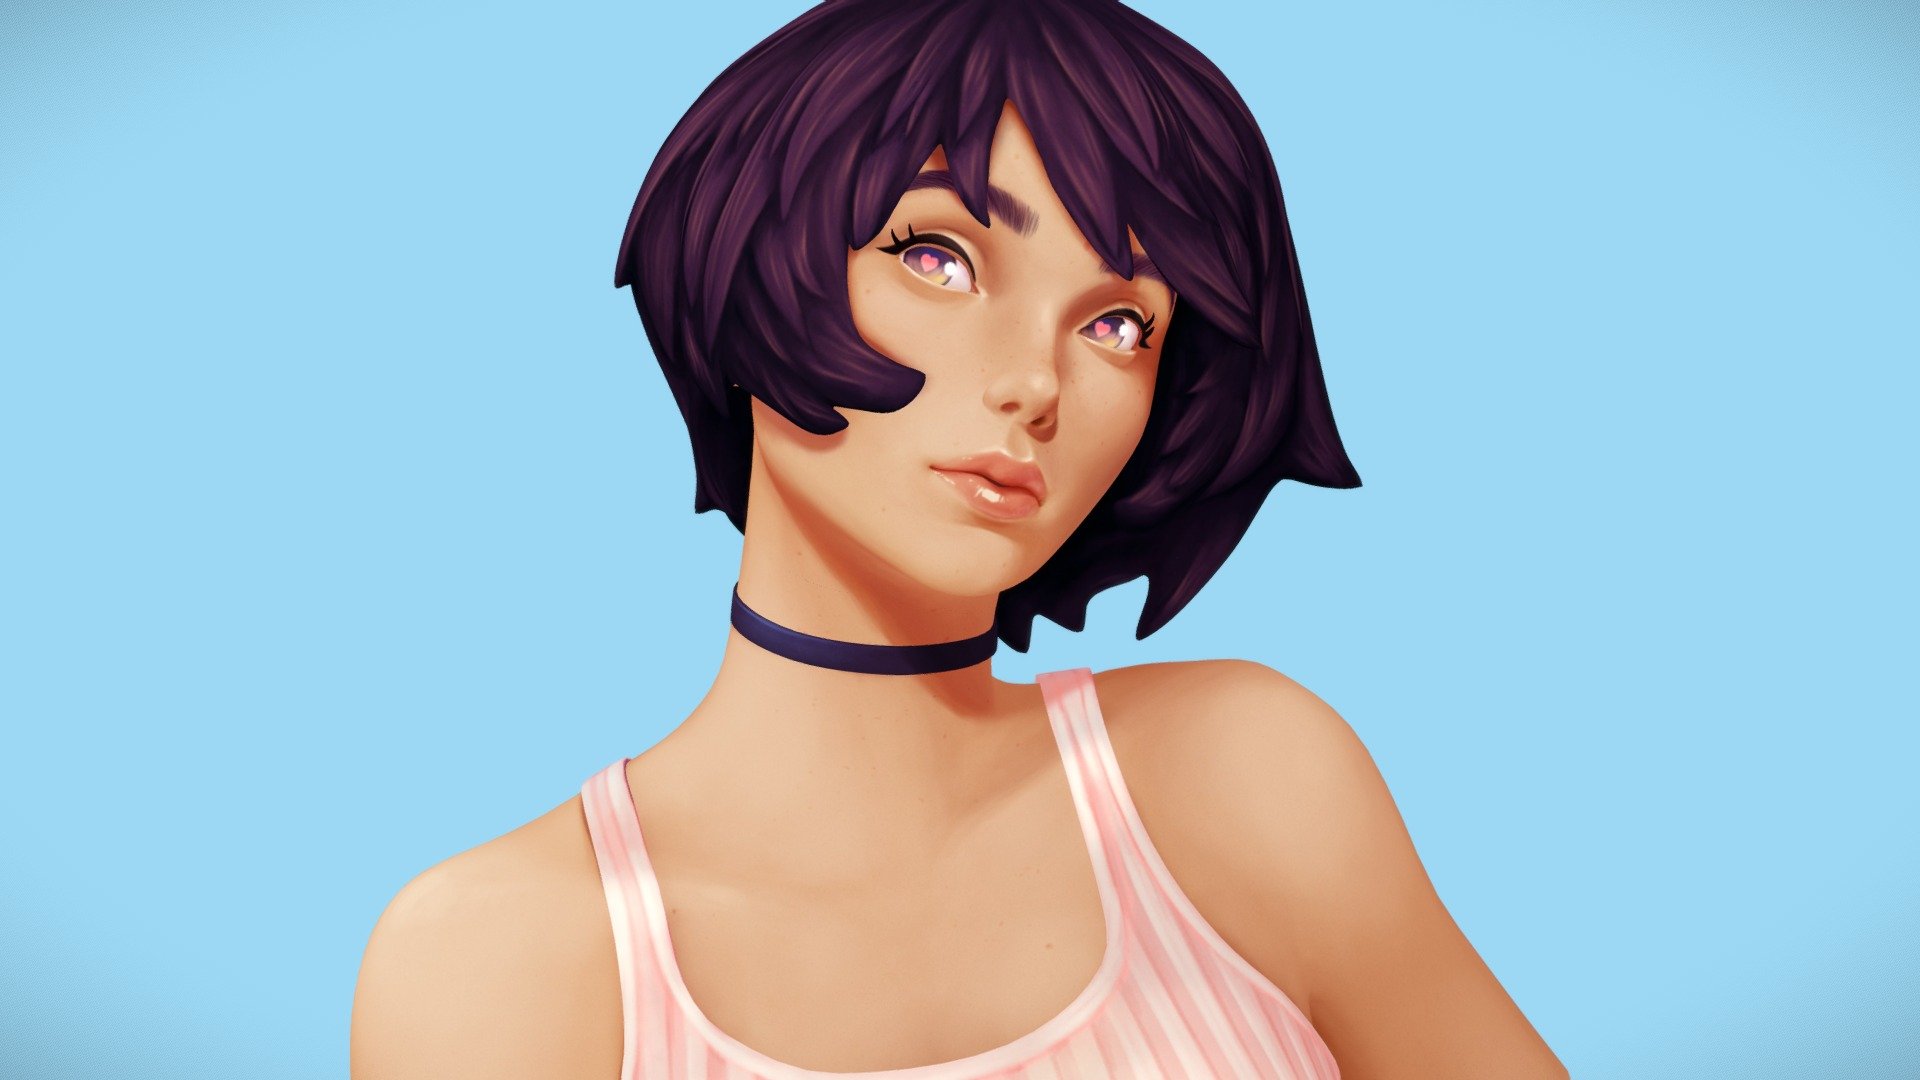 I finally decided to try my hand at some handpainted work for the first time and loved it!

This is based on a concept by Ilya Kuvshinov: https://www.artstation.com/artwork/LOl8v

You can check it out on Artstation: https://www.artstation.com/artwork/rRzbEa

Twitter: https://twitter.com/Ai__line - Lark - 3D model by Ai-line 3d model